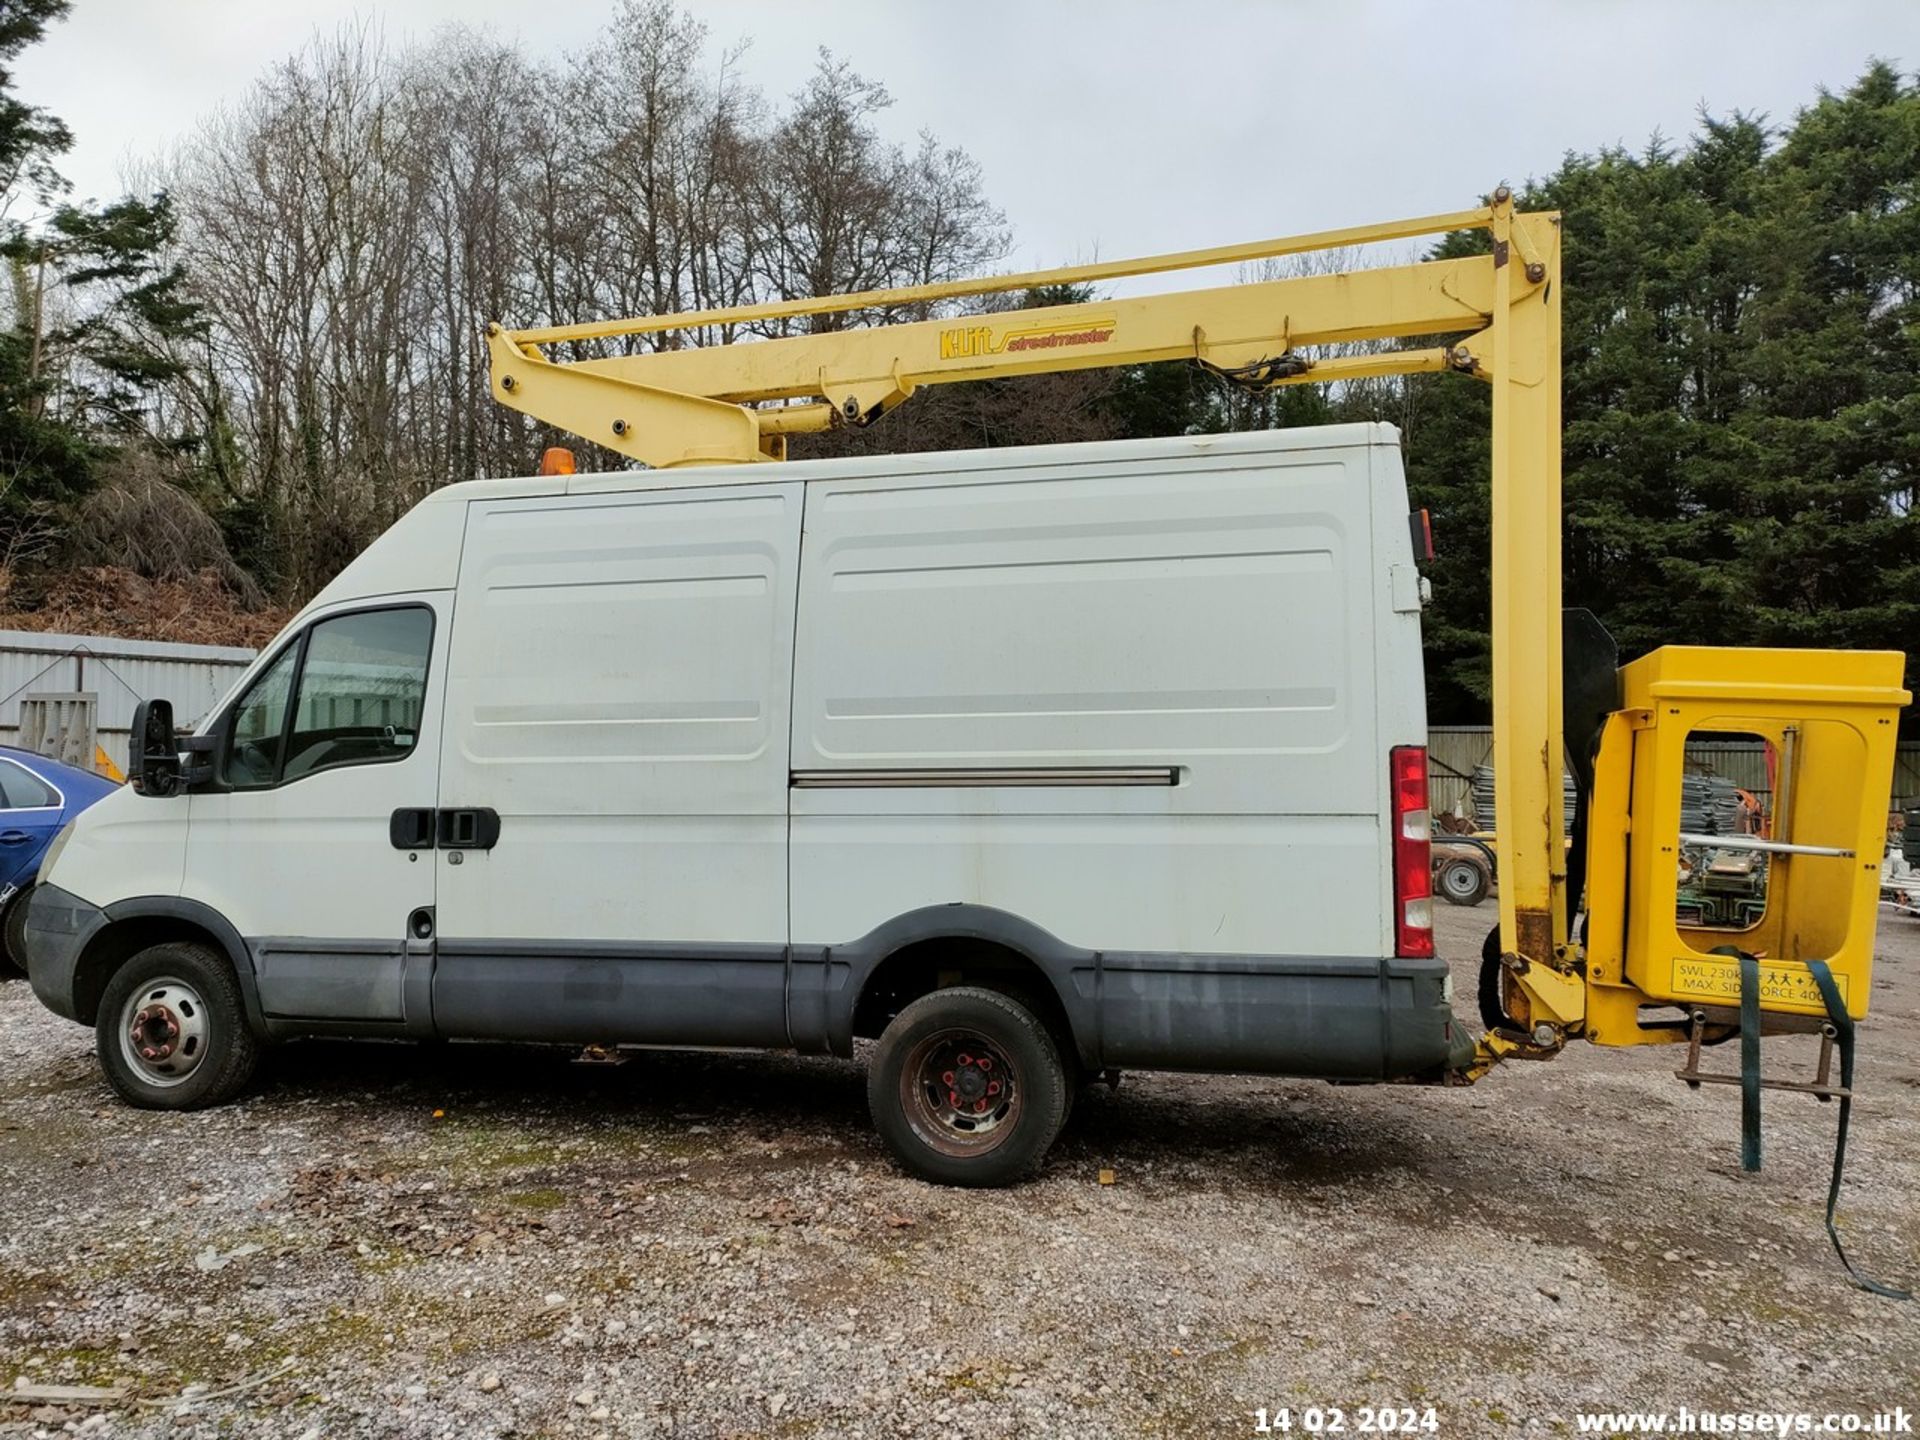 10/60 IVECO DAILY 50C15 - 2998cc (White) - Image 10 of 33